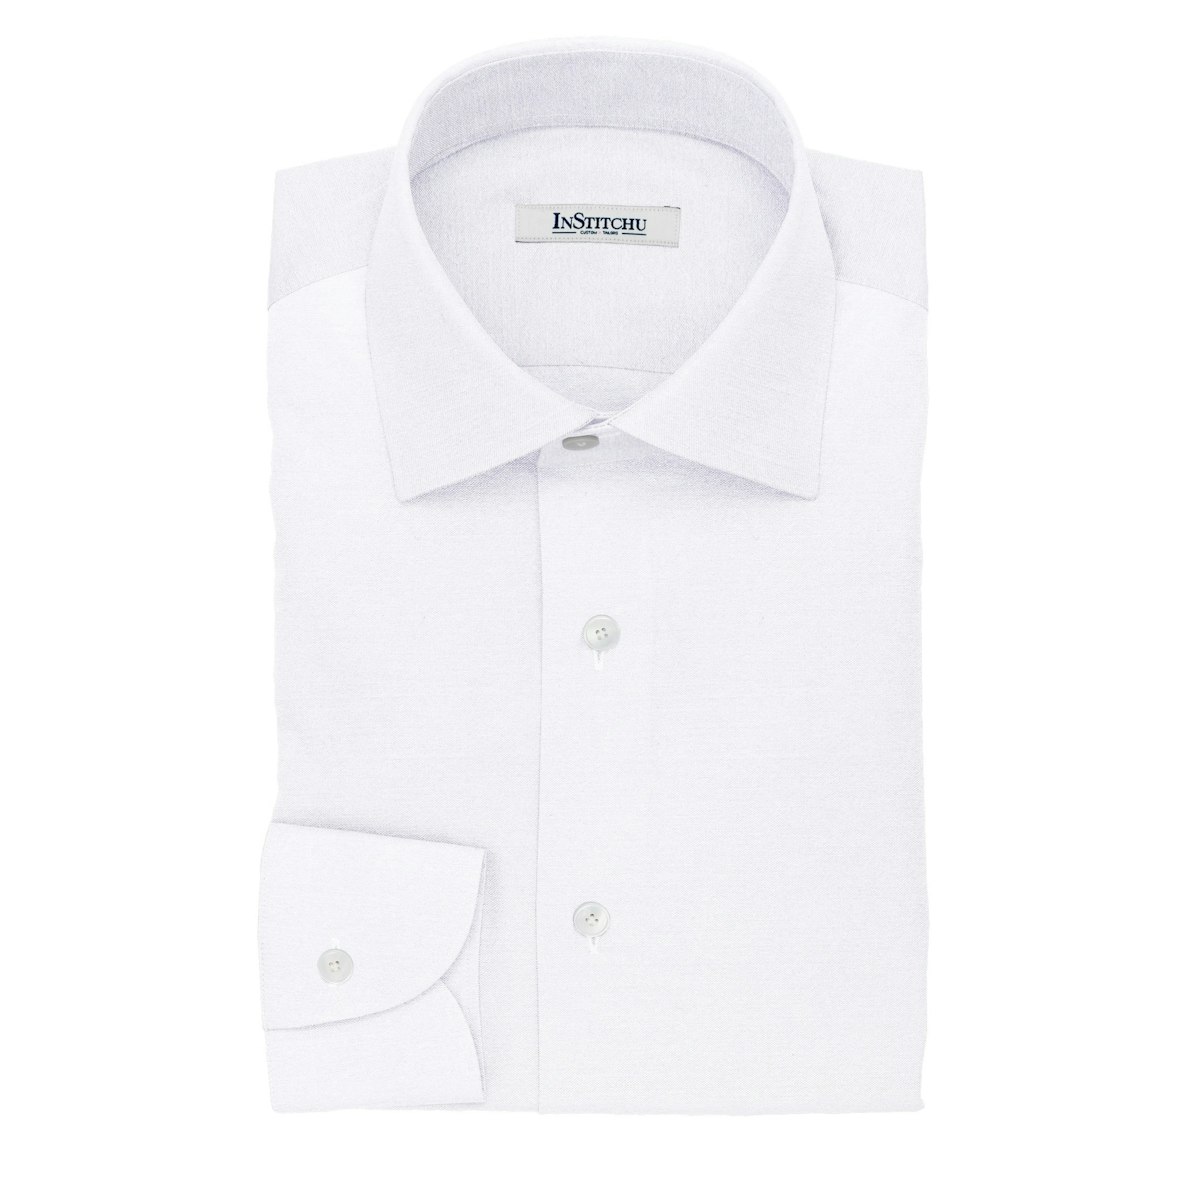 InStitchu Collection The Connelly White Cotton Shirt